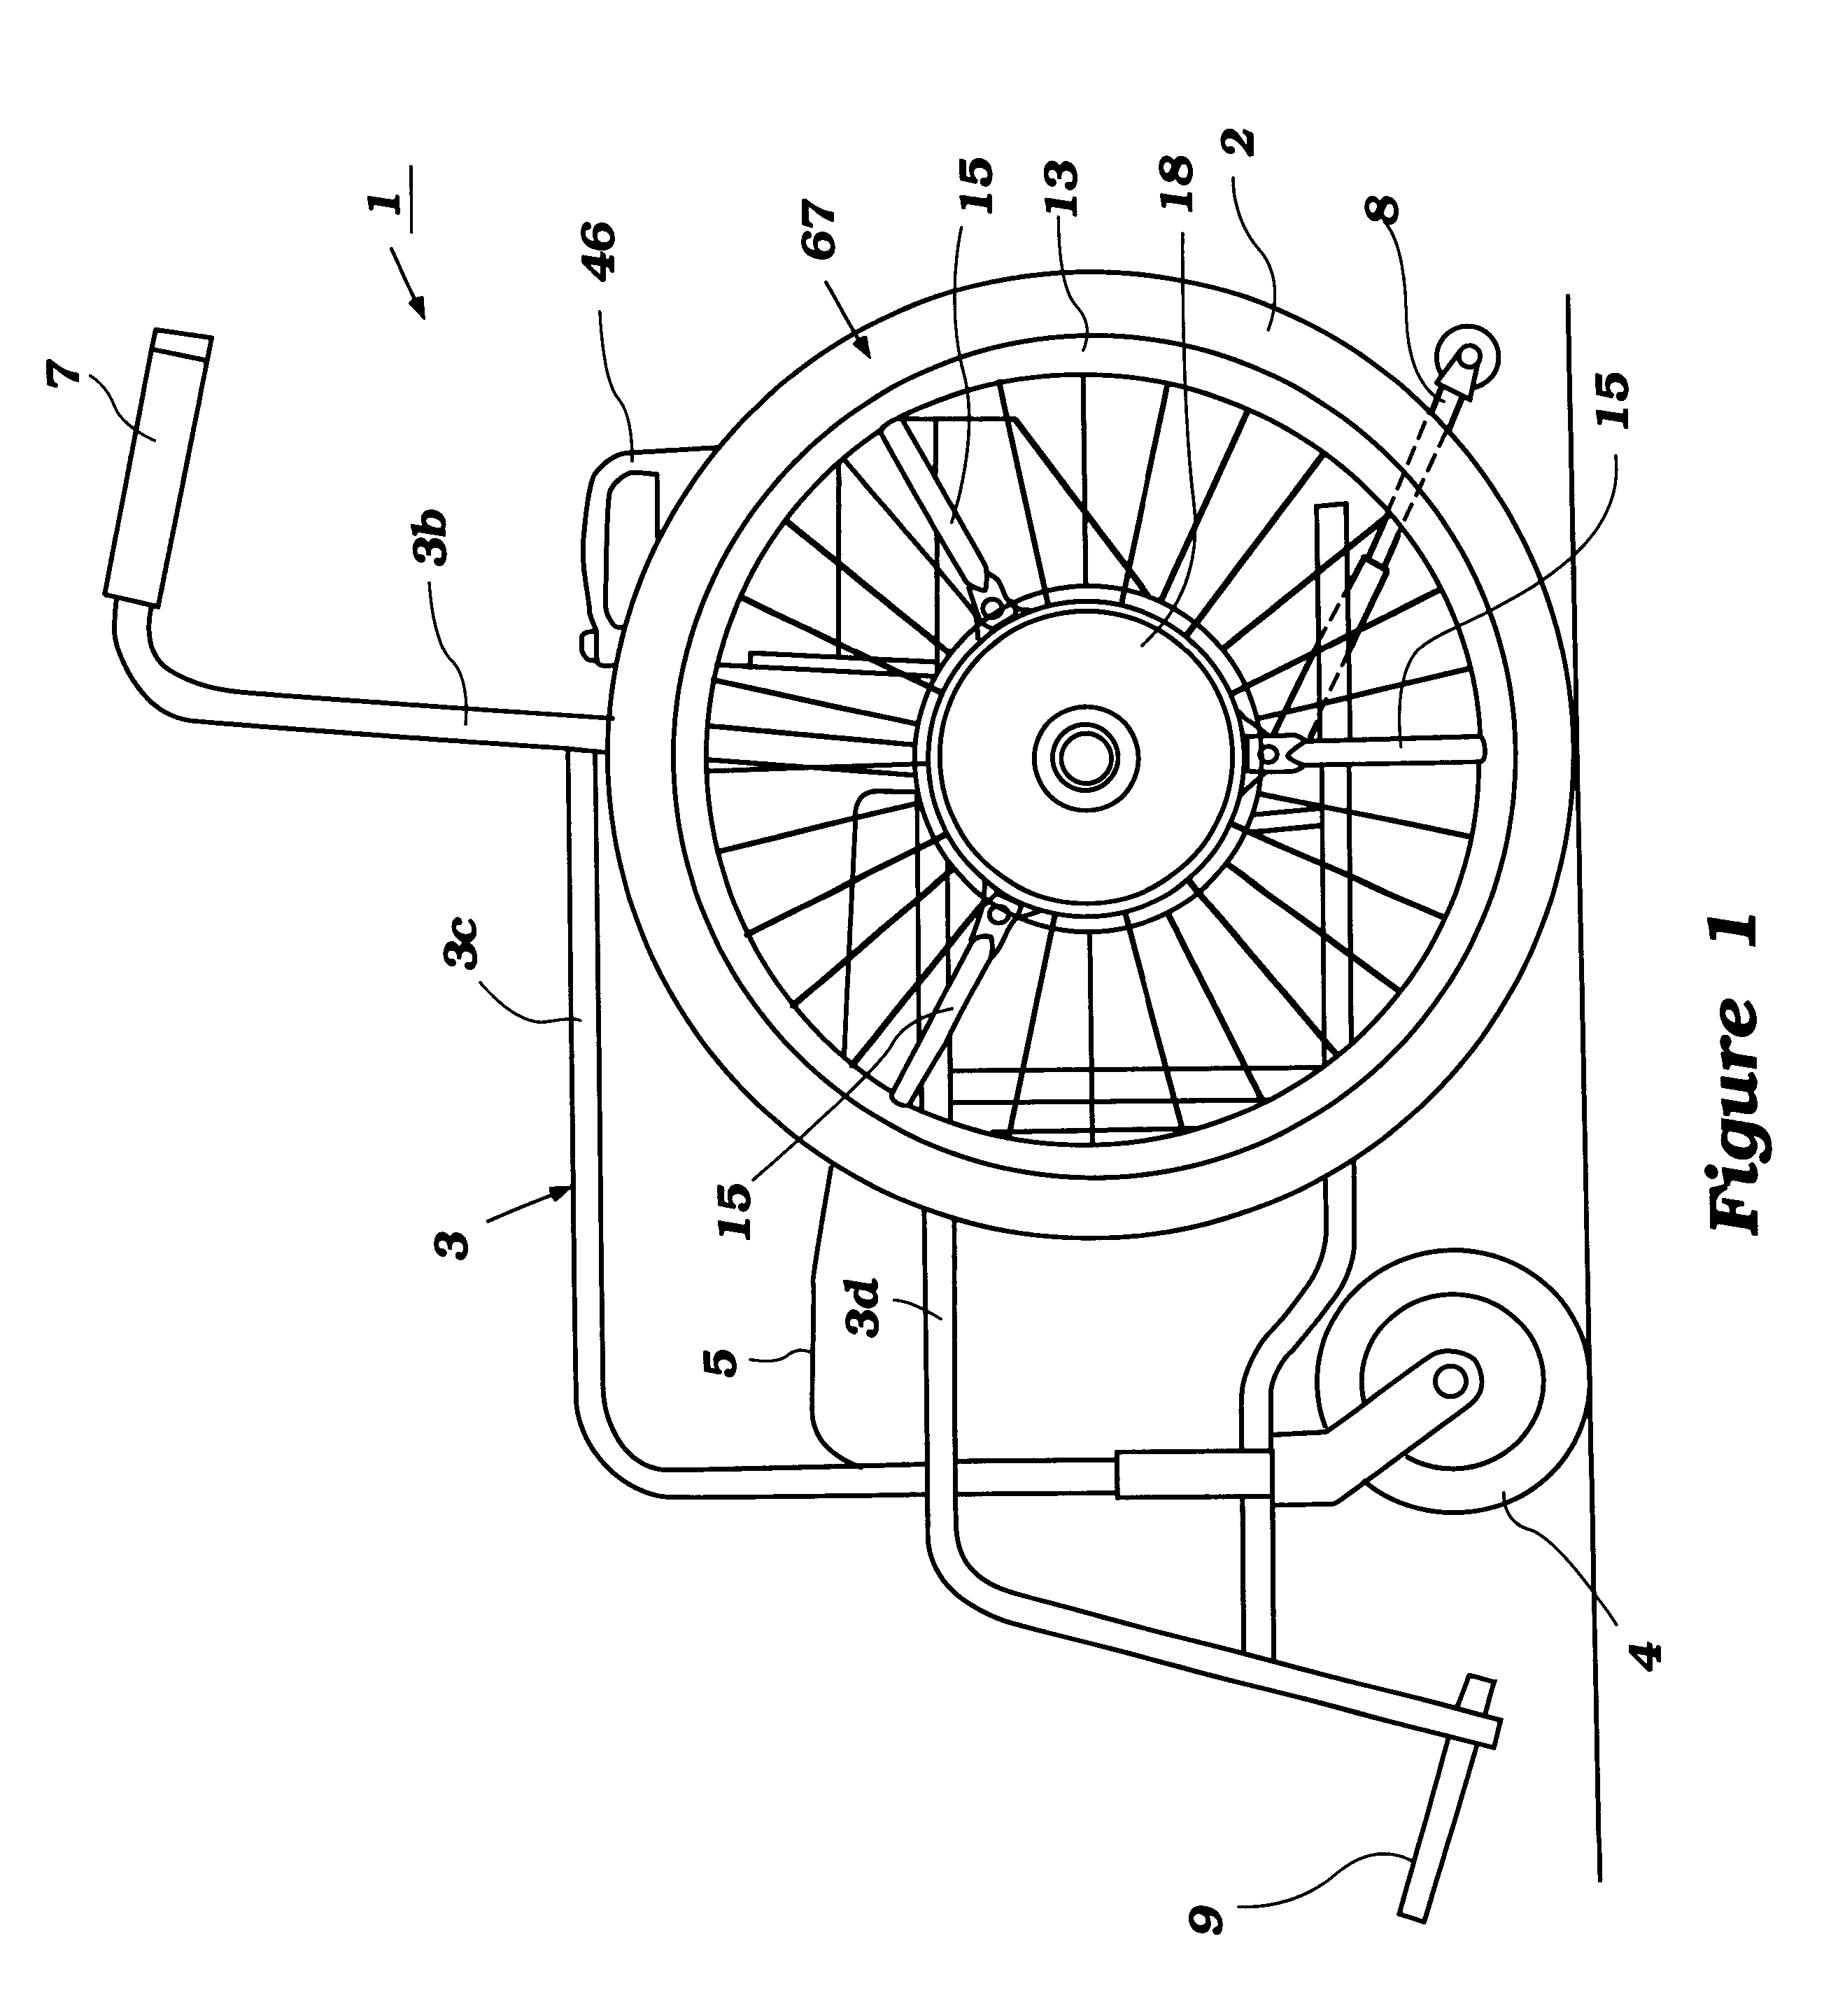 Wheel chair with auxiliary power